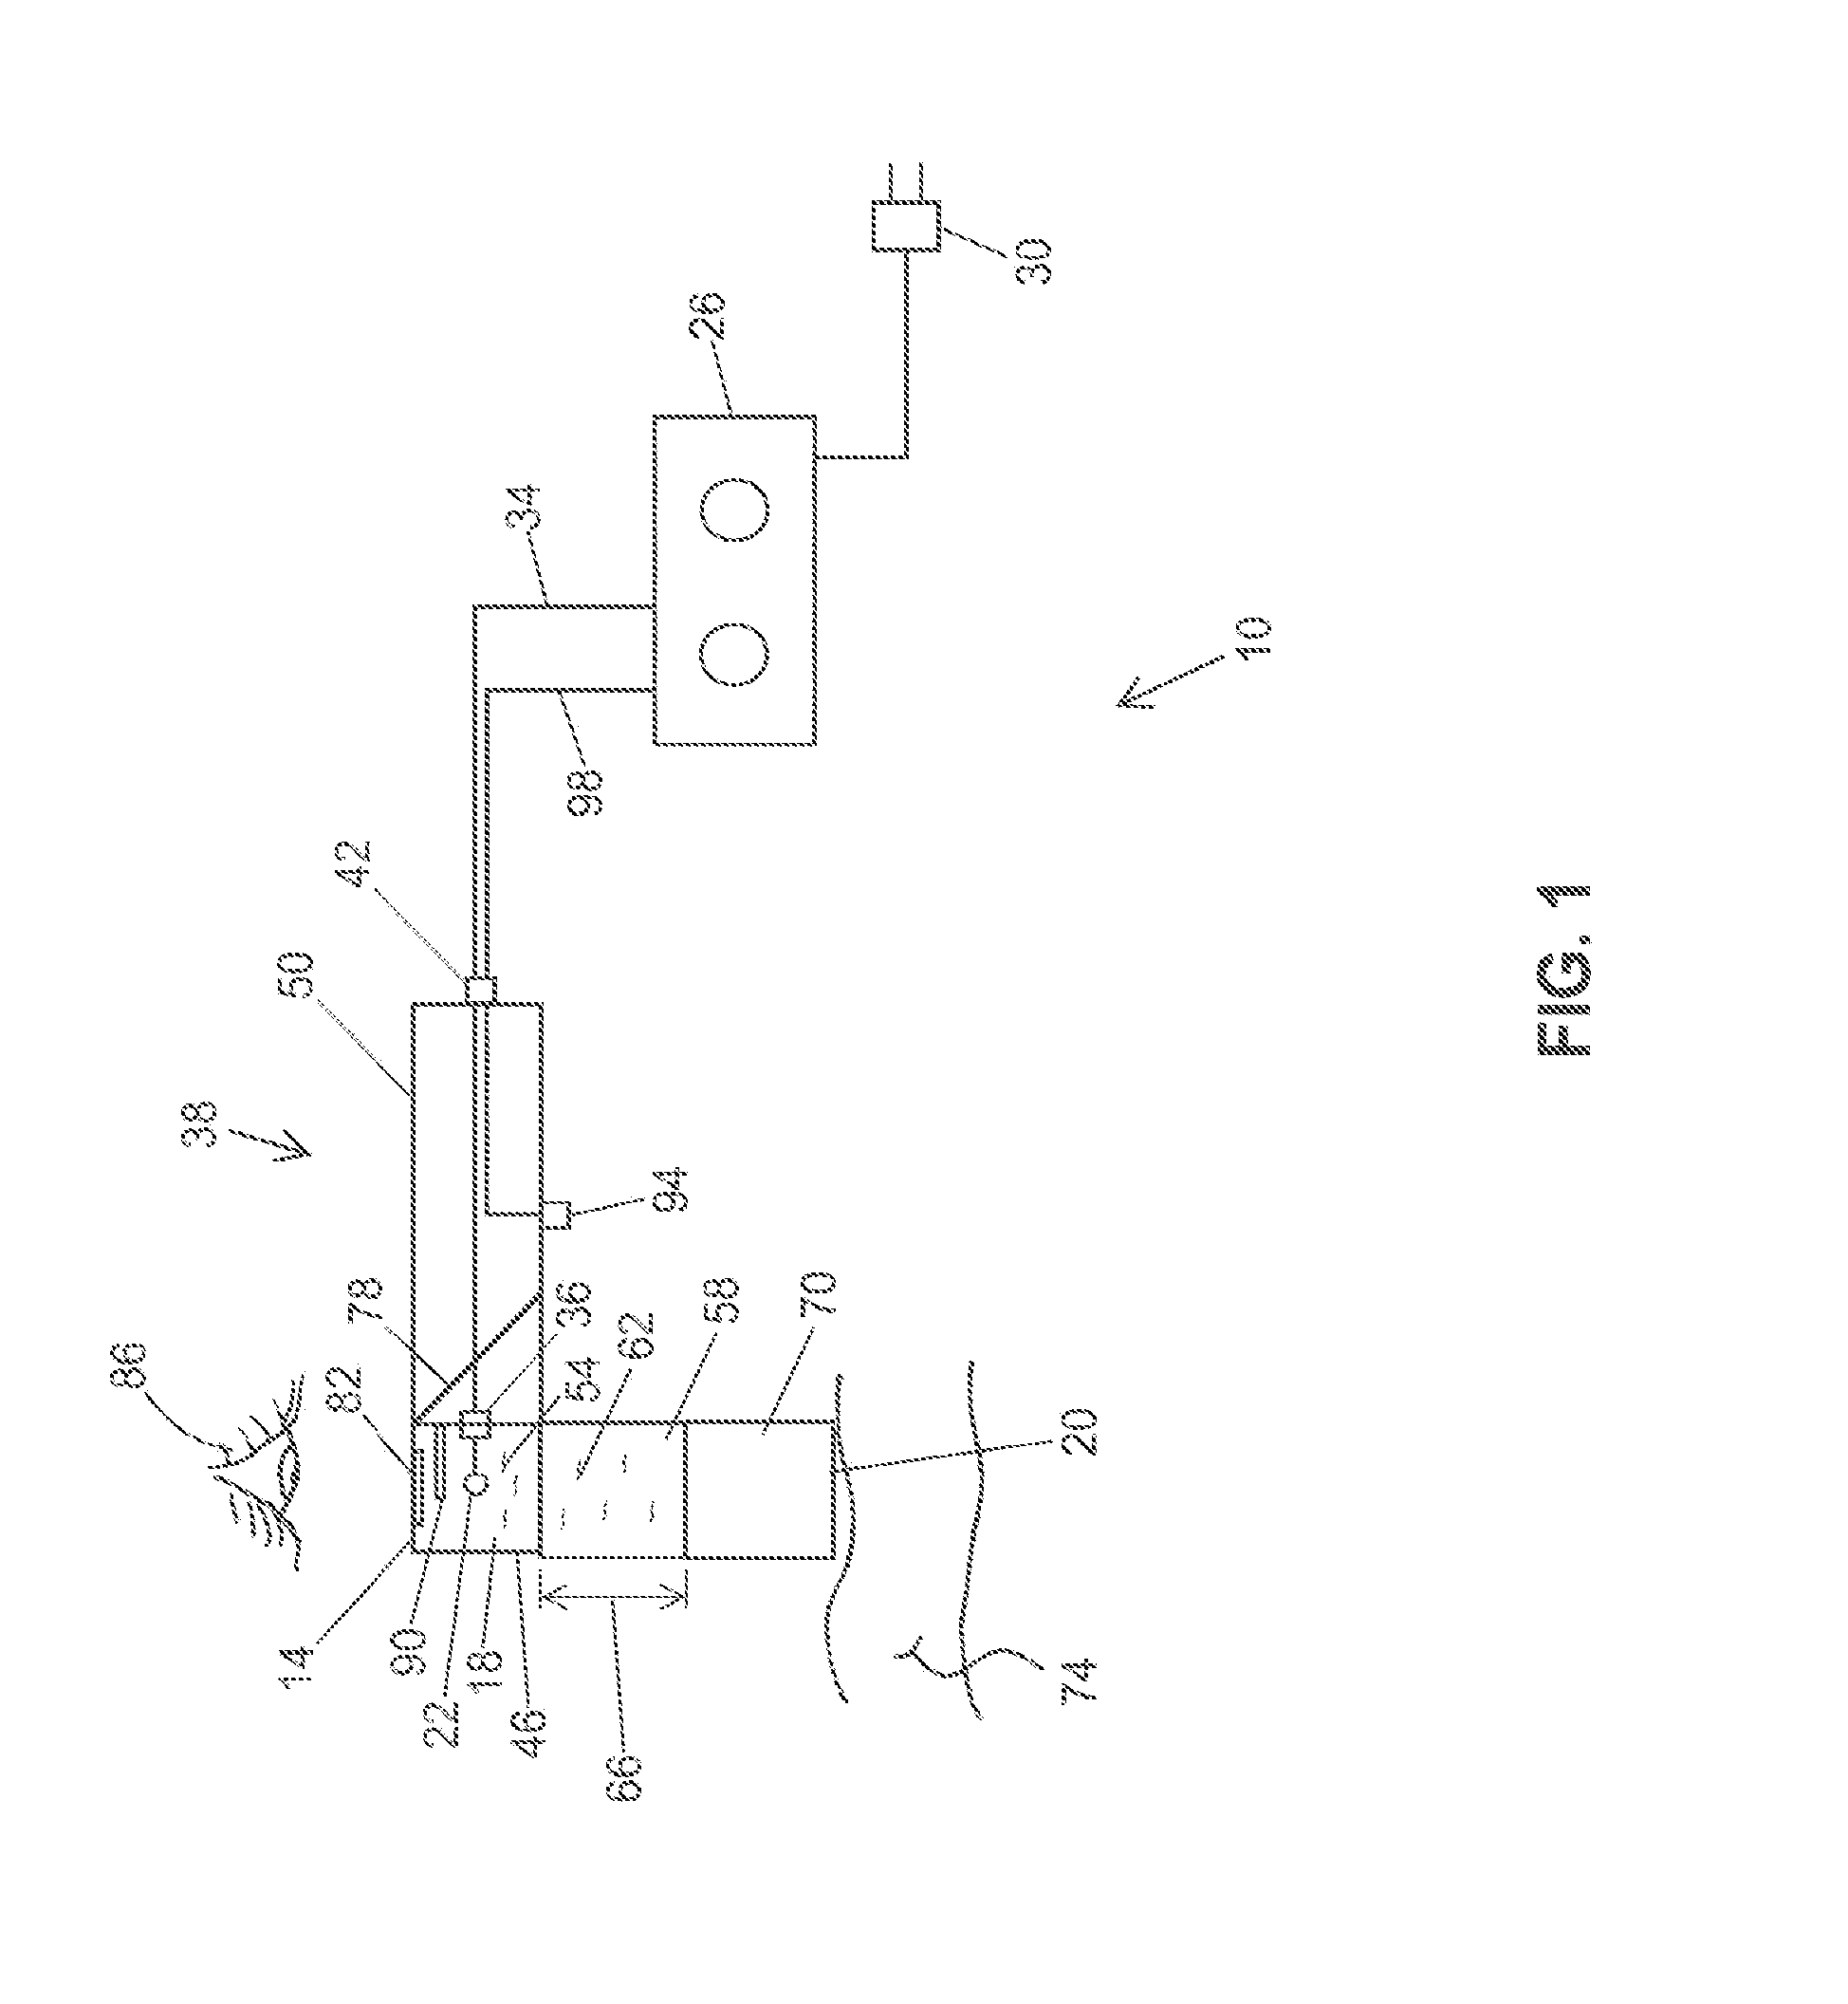 Rapid pulse electrohydraulic (EH) shockwave generator apparatus and methods for medical and cosmetic treatments